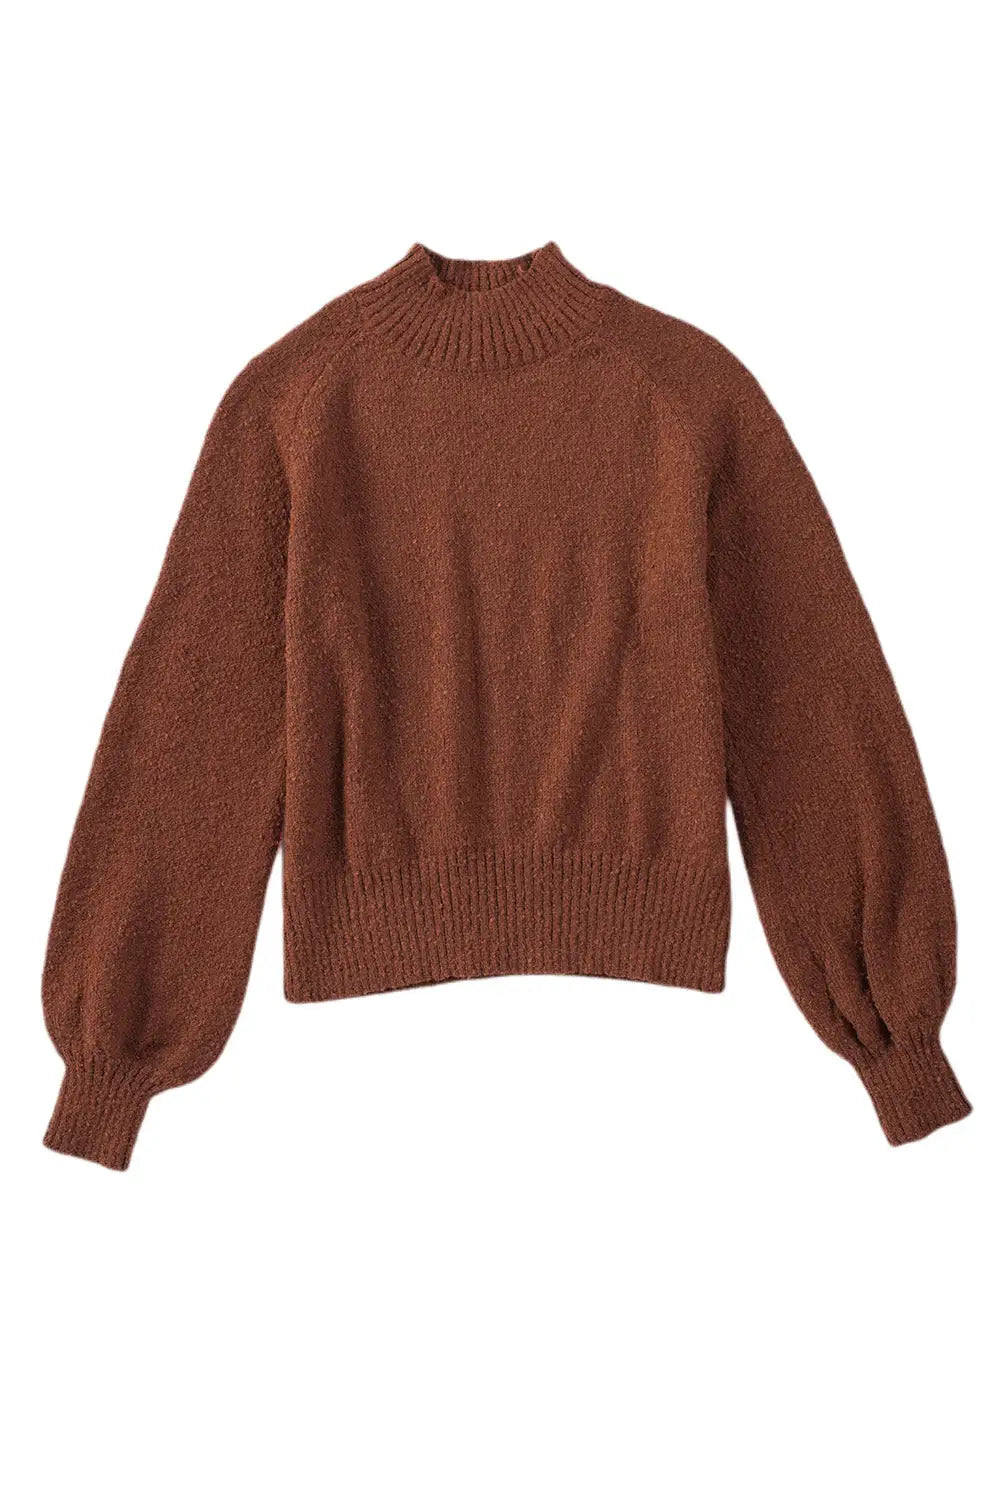 Brown solid color lantern sleeve knitted sweater - sweaters & cardigans